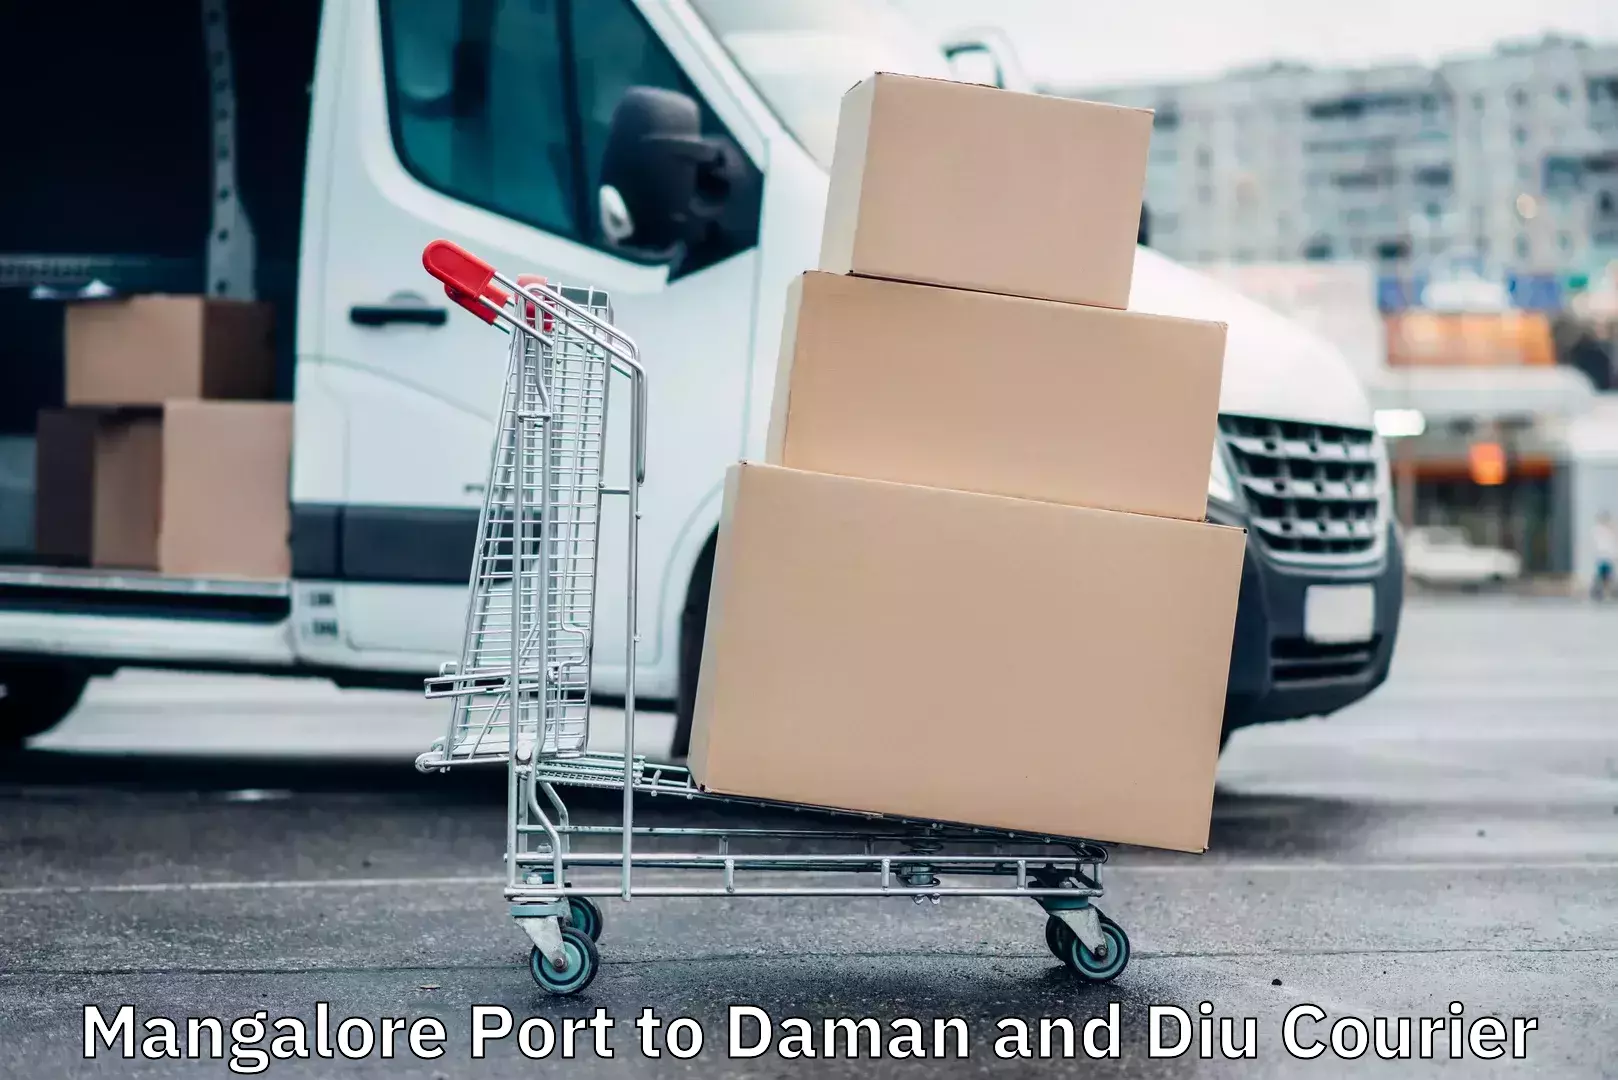 Business delivery service in Mangalore Port to Daman and Diu